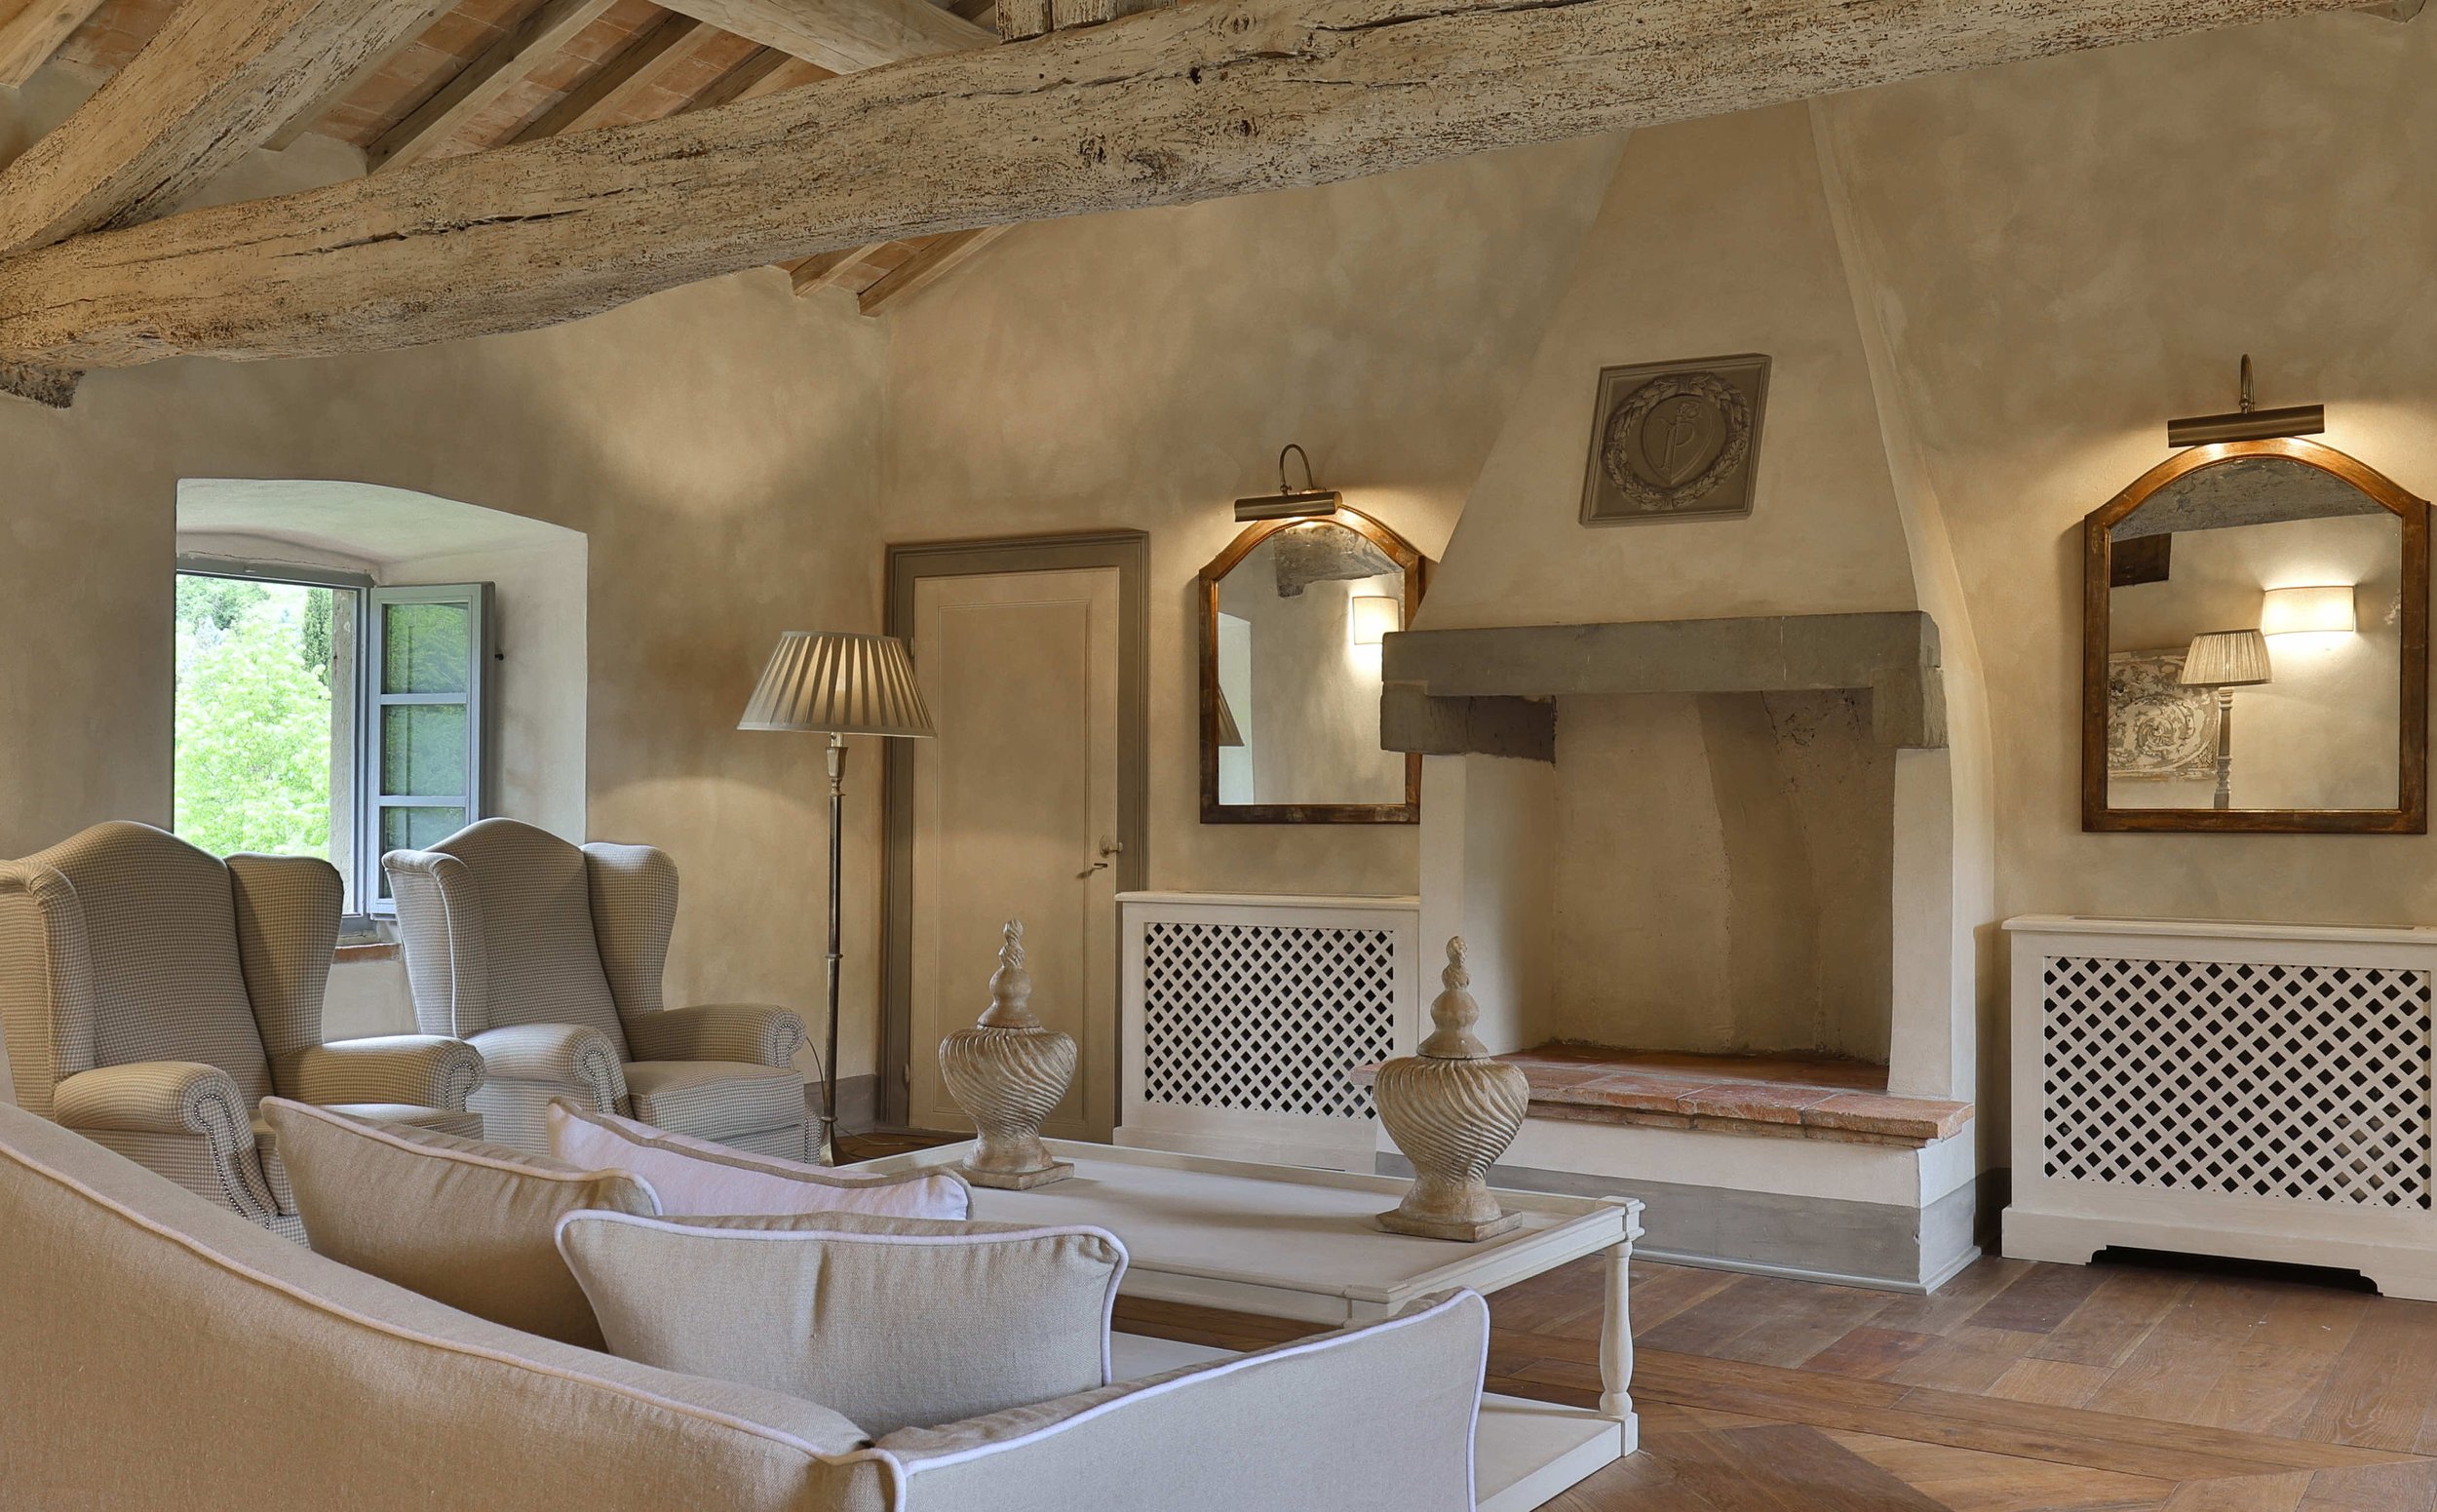 Francis York NEW Luxury Holiday Rental in the Chianti Hills, Tuscany Booking This Summer  19.jpg